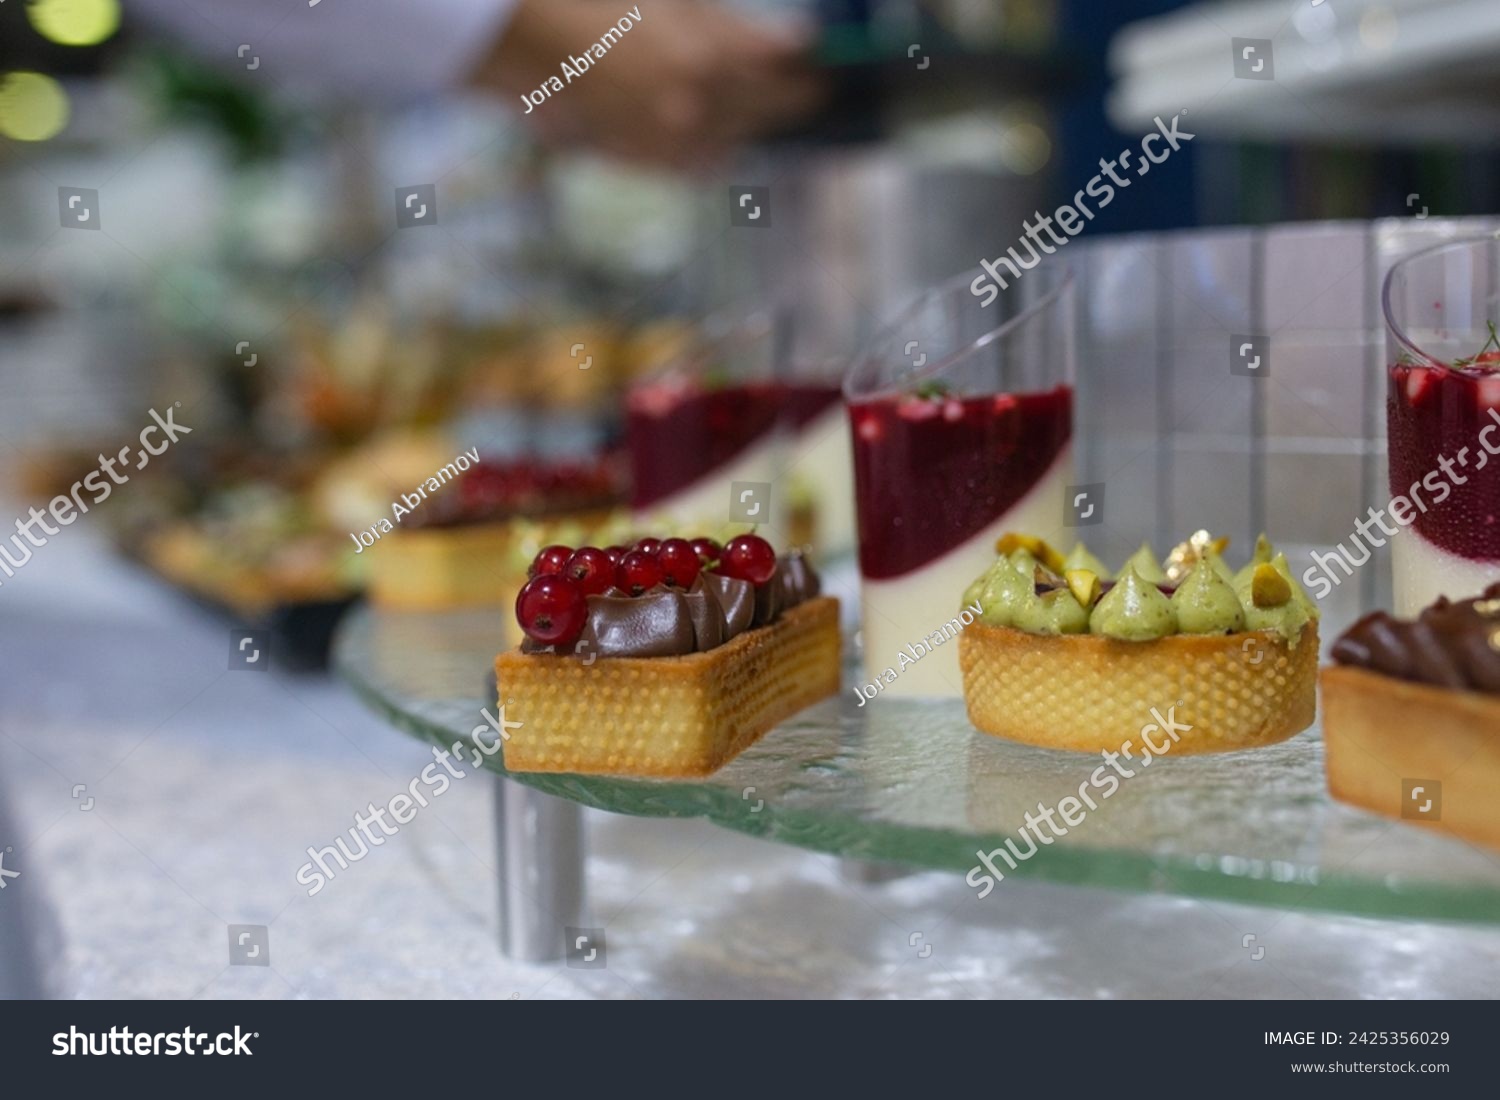 Variety of sweet and savory canapes and desserts displayed on glass shelf. Canapes topped with ingredients like caviar, salmon, and vegetables. Desserts include tarts, cakes, and pastries. #2425356029